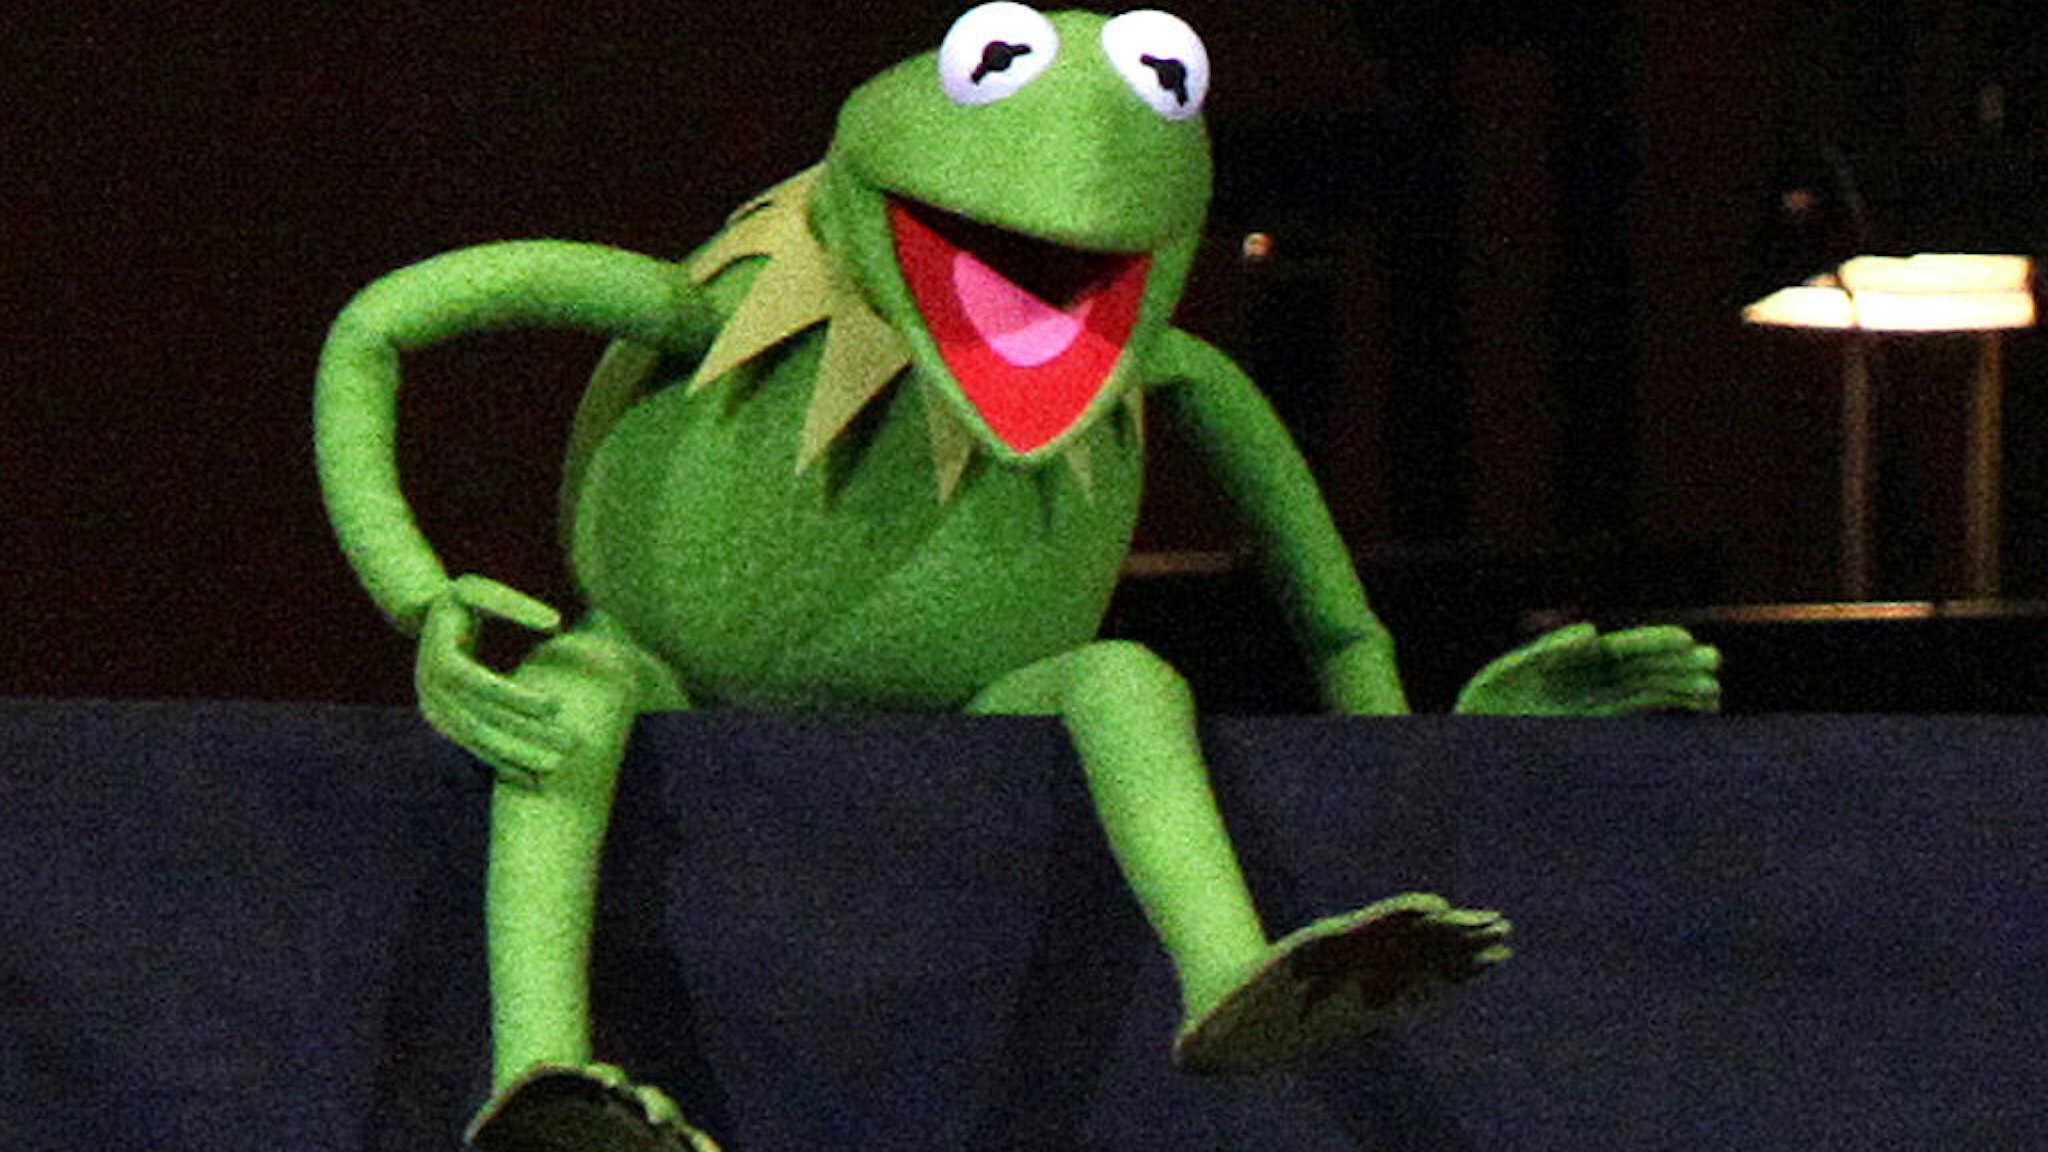 NEW YORK, NY - APRIL 14: Kermit the Frog performs during the The New York Pops Present "Jim Henson's Musical World" at Carnegie Hall on April 14, 2012 in New York City. (Photo by Paul Zimmerman/Getty Images)